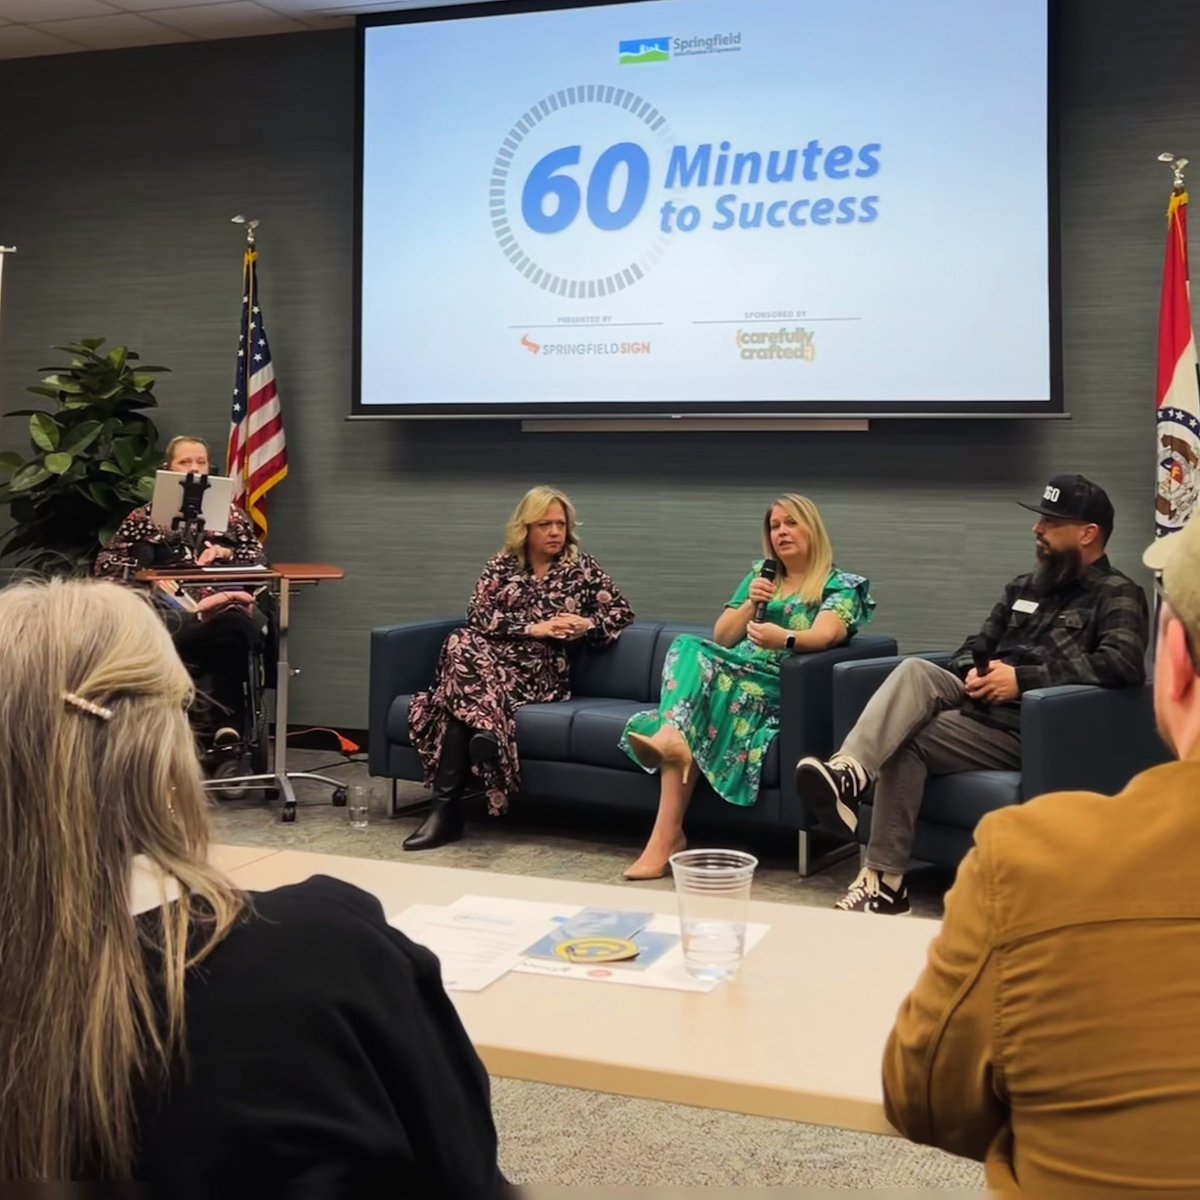 Thank you @SGFChamber for allowing me the opportunity to share about what it looks like to hire individuals with disabilities in our community. It was great to share the panel with Kristi from @AbilitiesFirst, Nancy from Jordan Essentials, and Scott from @dsgolife.